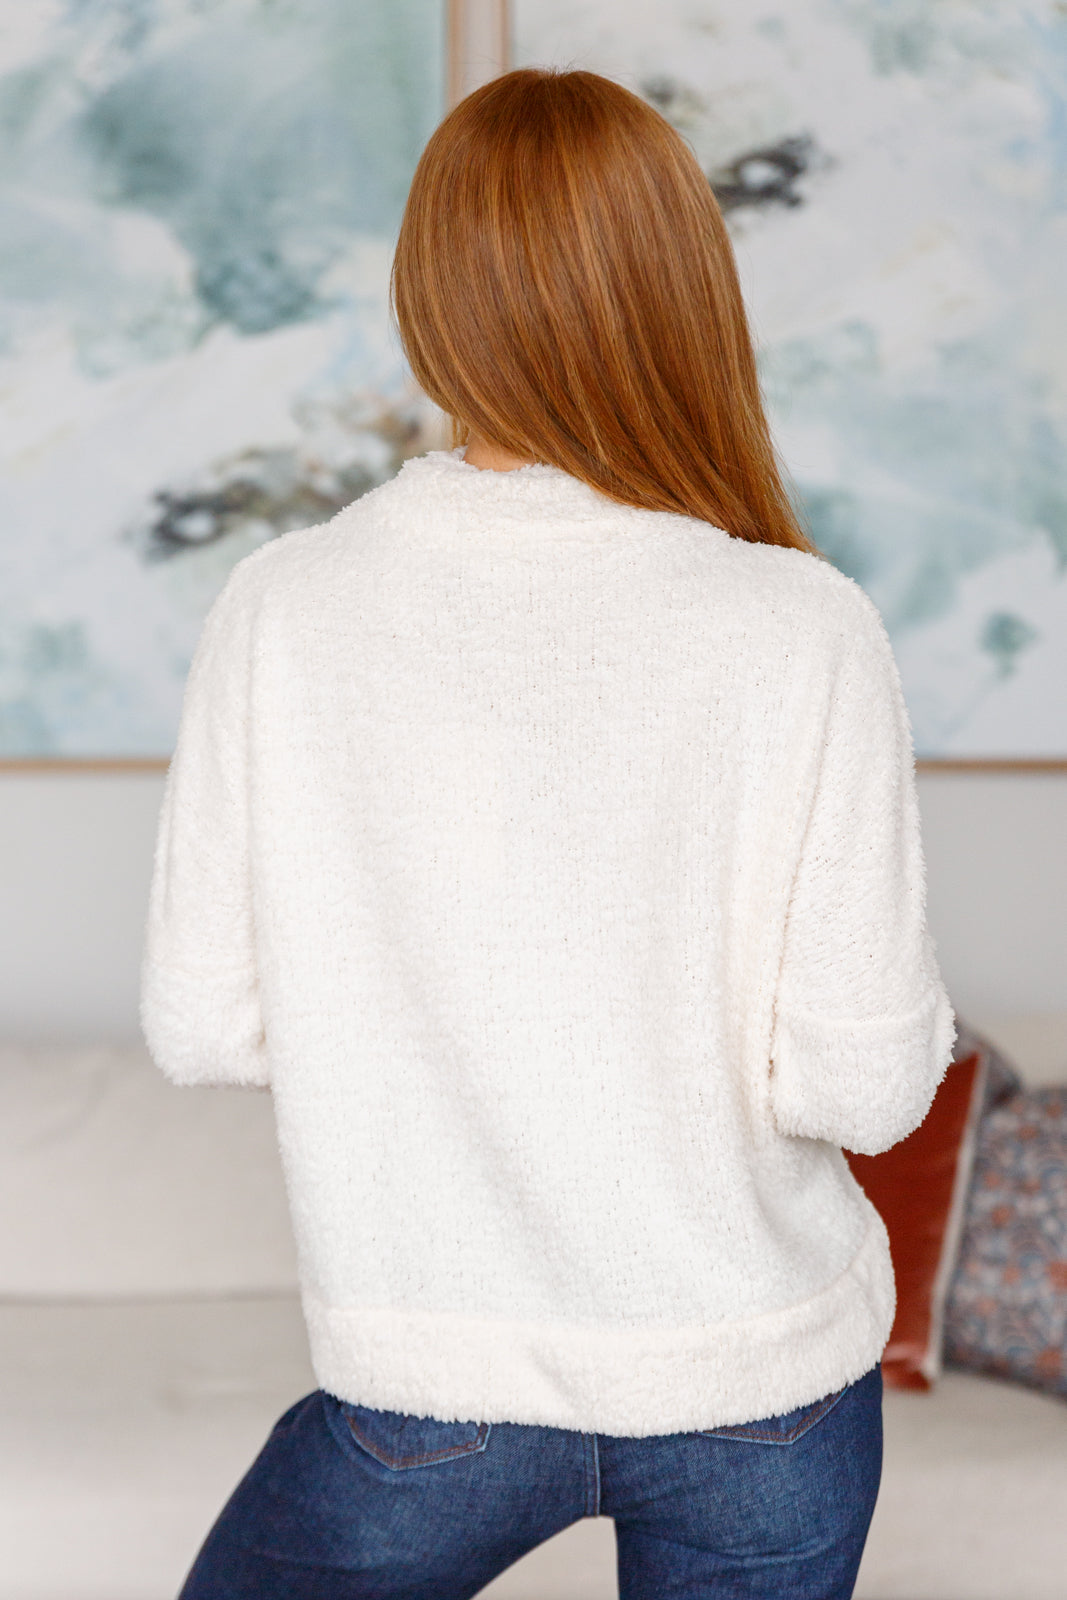 Curl up in style with this cozy Expecting Snow Mock Neck Boucle Sweater